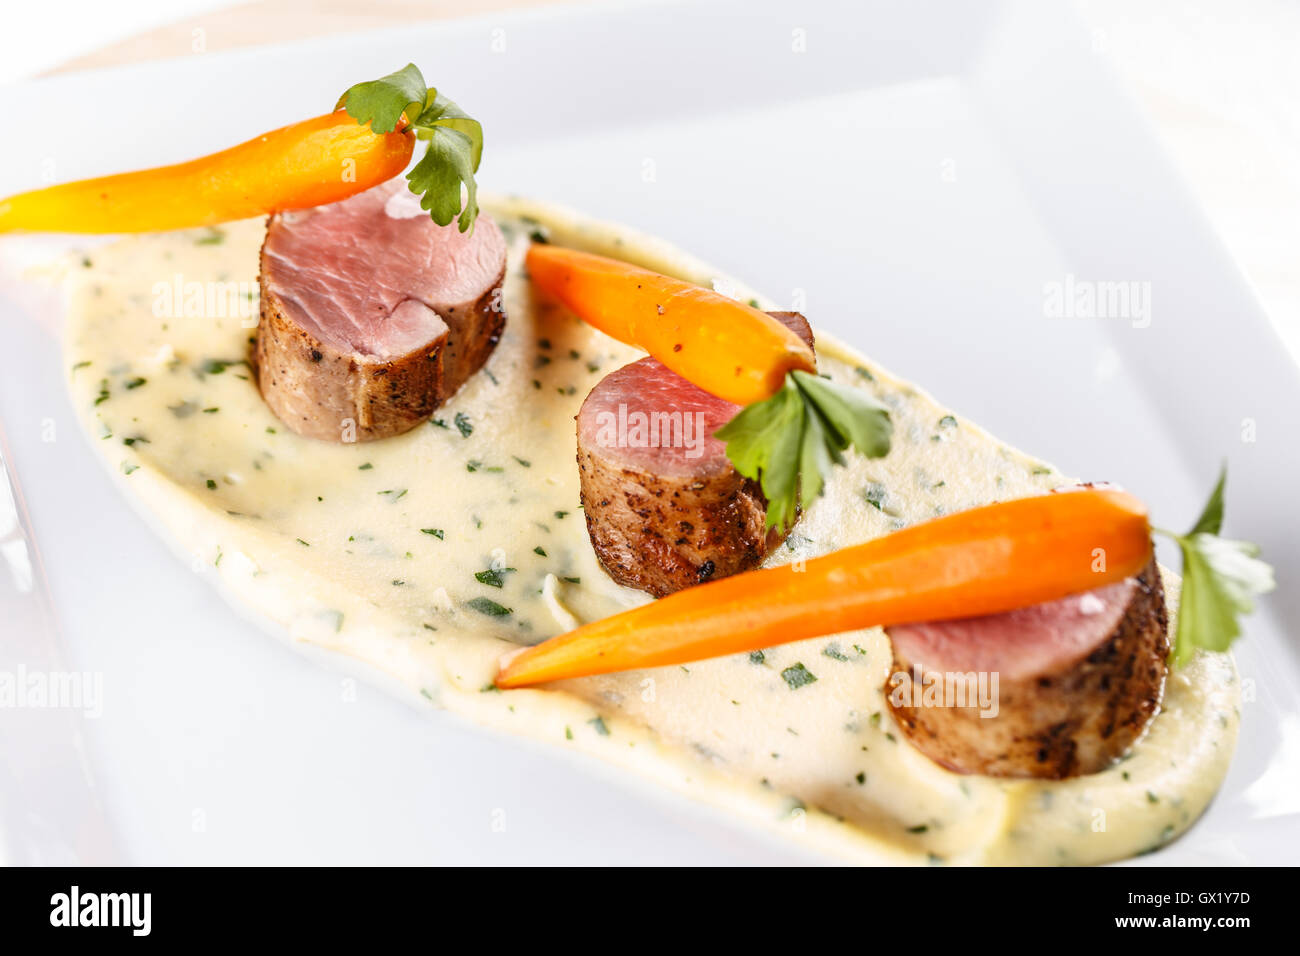 Fine dining meal with pork loin fillet, carrots and mashed potatoes Stock Photo